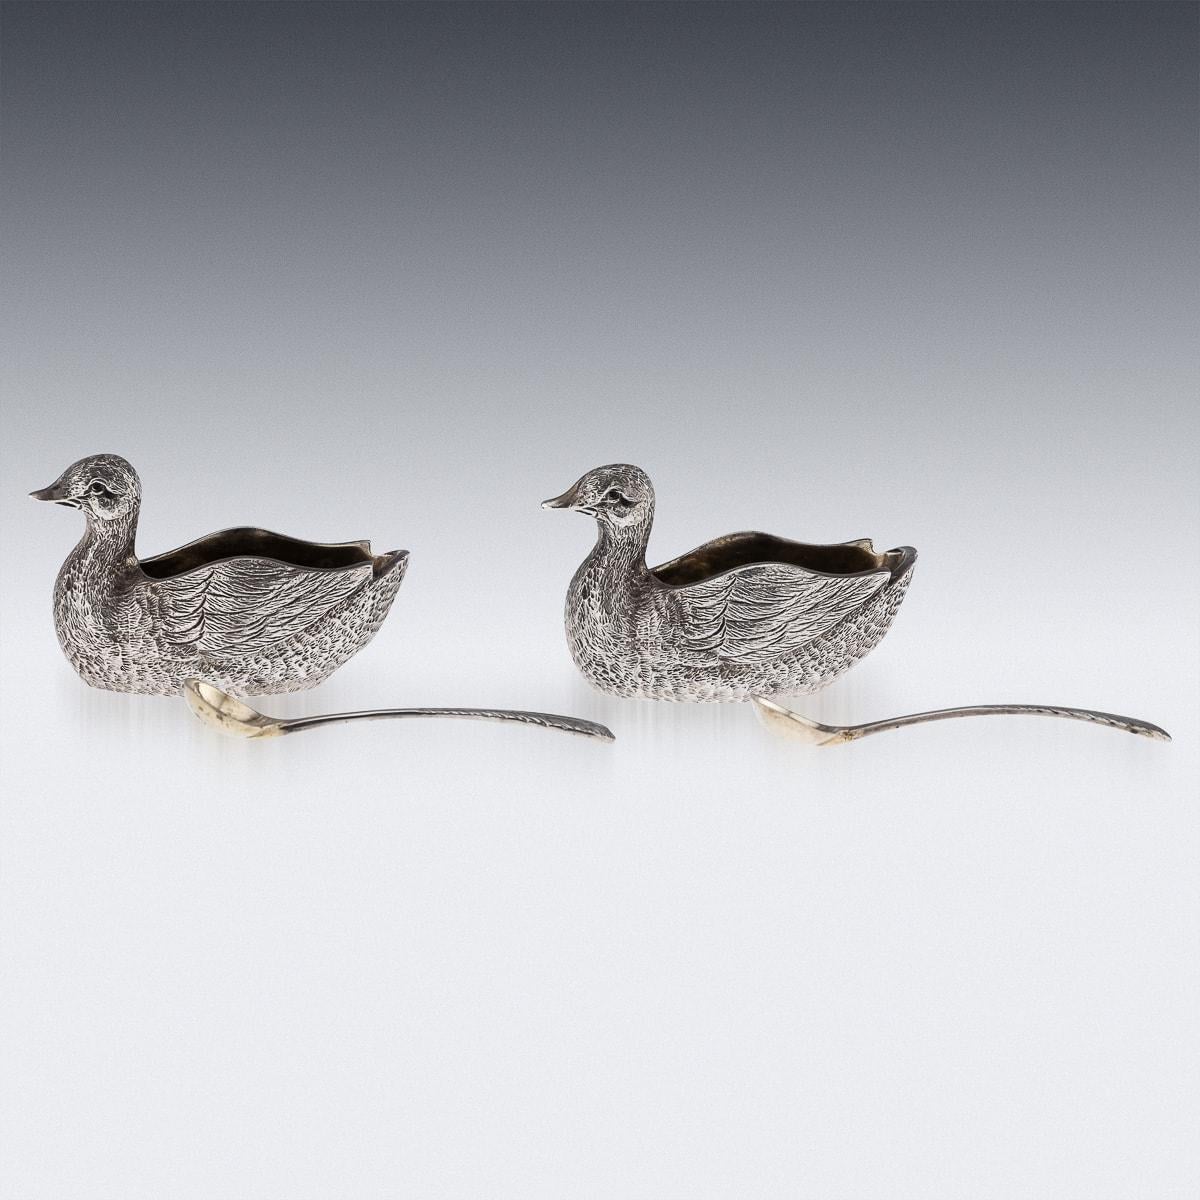 Late 20th Century solid silver pair of novelty duck shaped salts & spoons, beautifully cast and realistically modelled as a ducks, the body cast with a detailed textured plumage. Hallmarked English silver (925 standard), London, year 1982 (H),